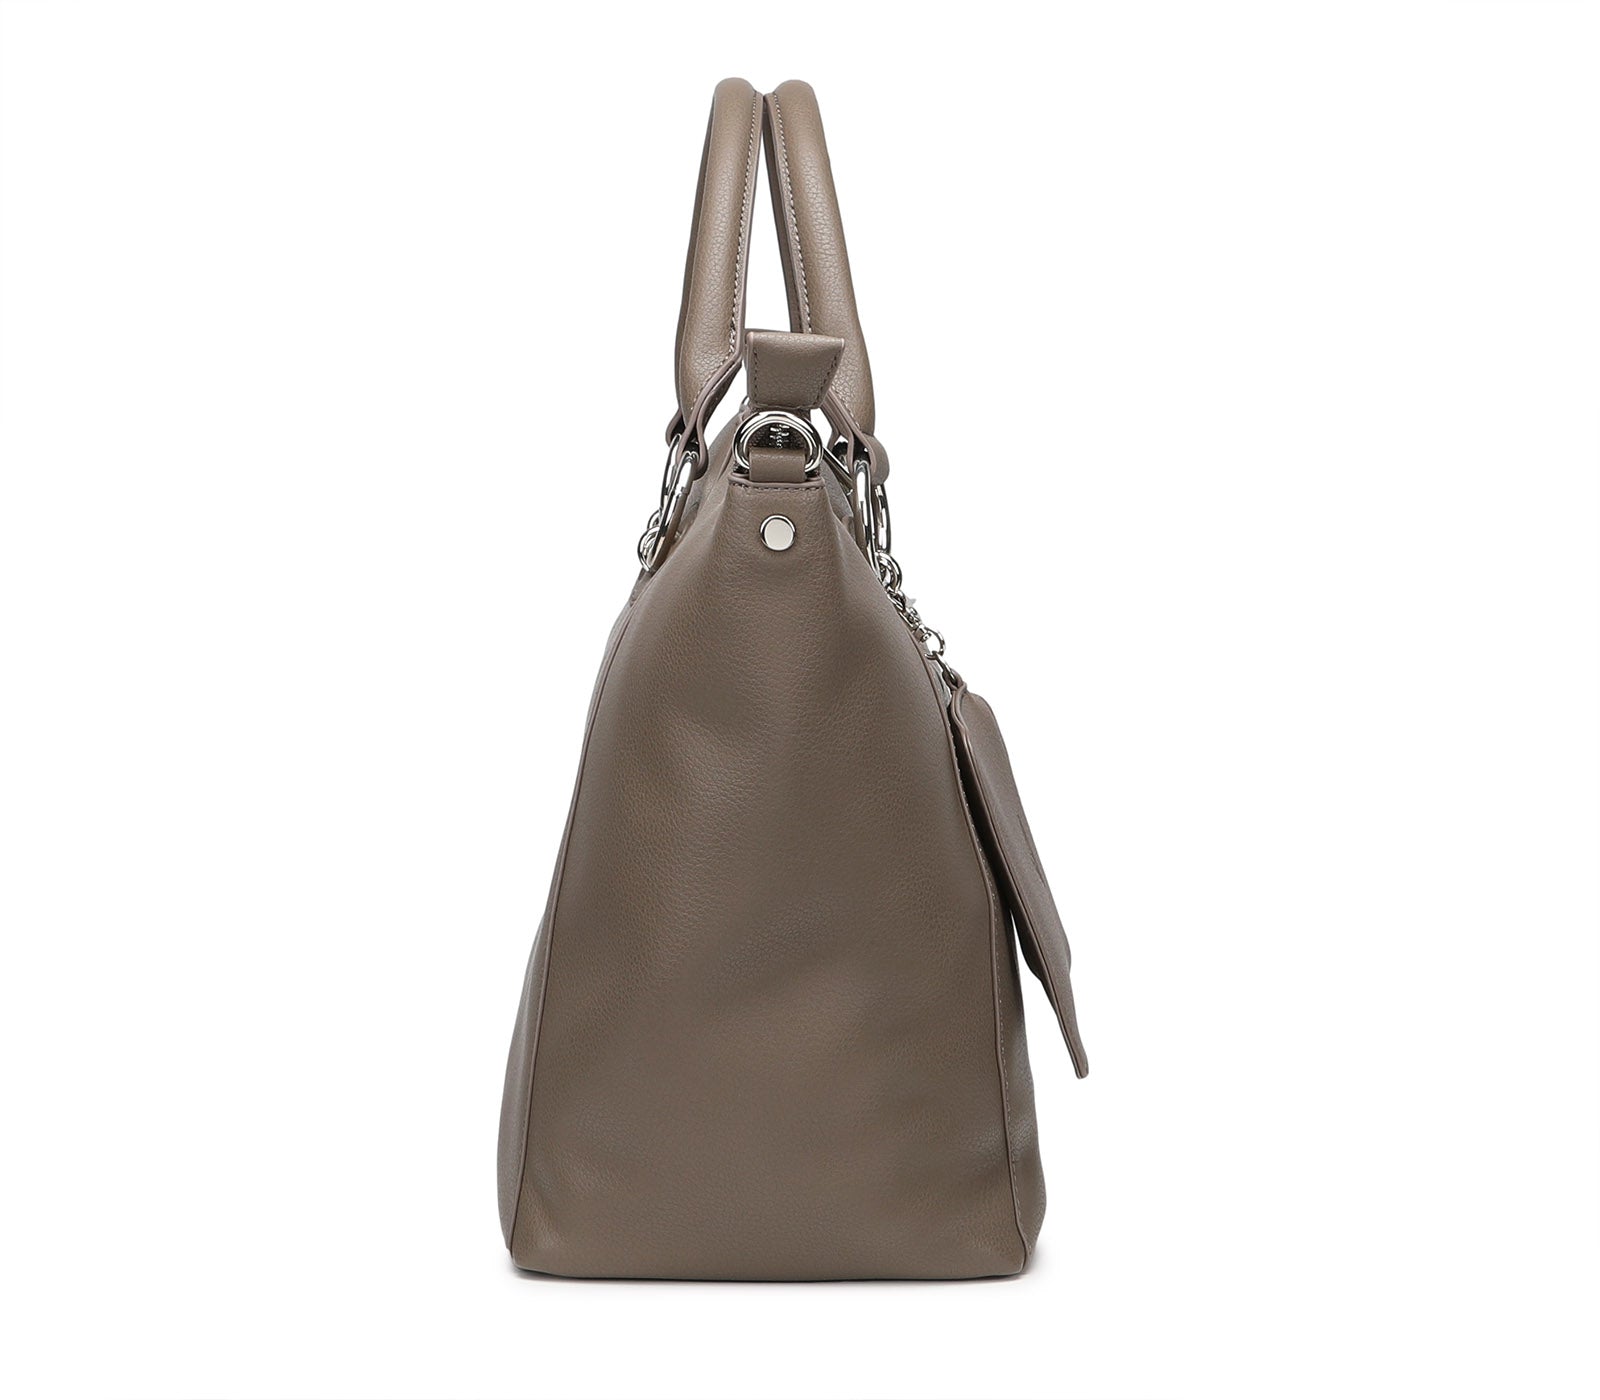 Women's Hand Bag with Inside Pocket and Zip Closure